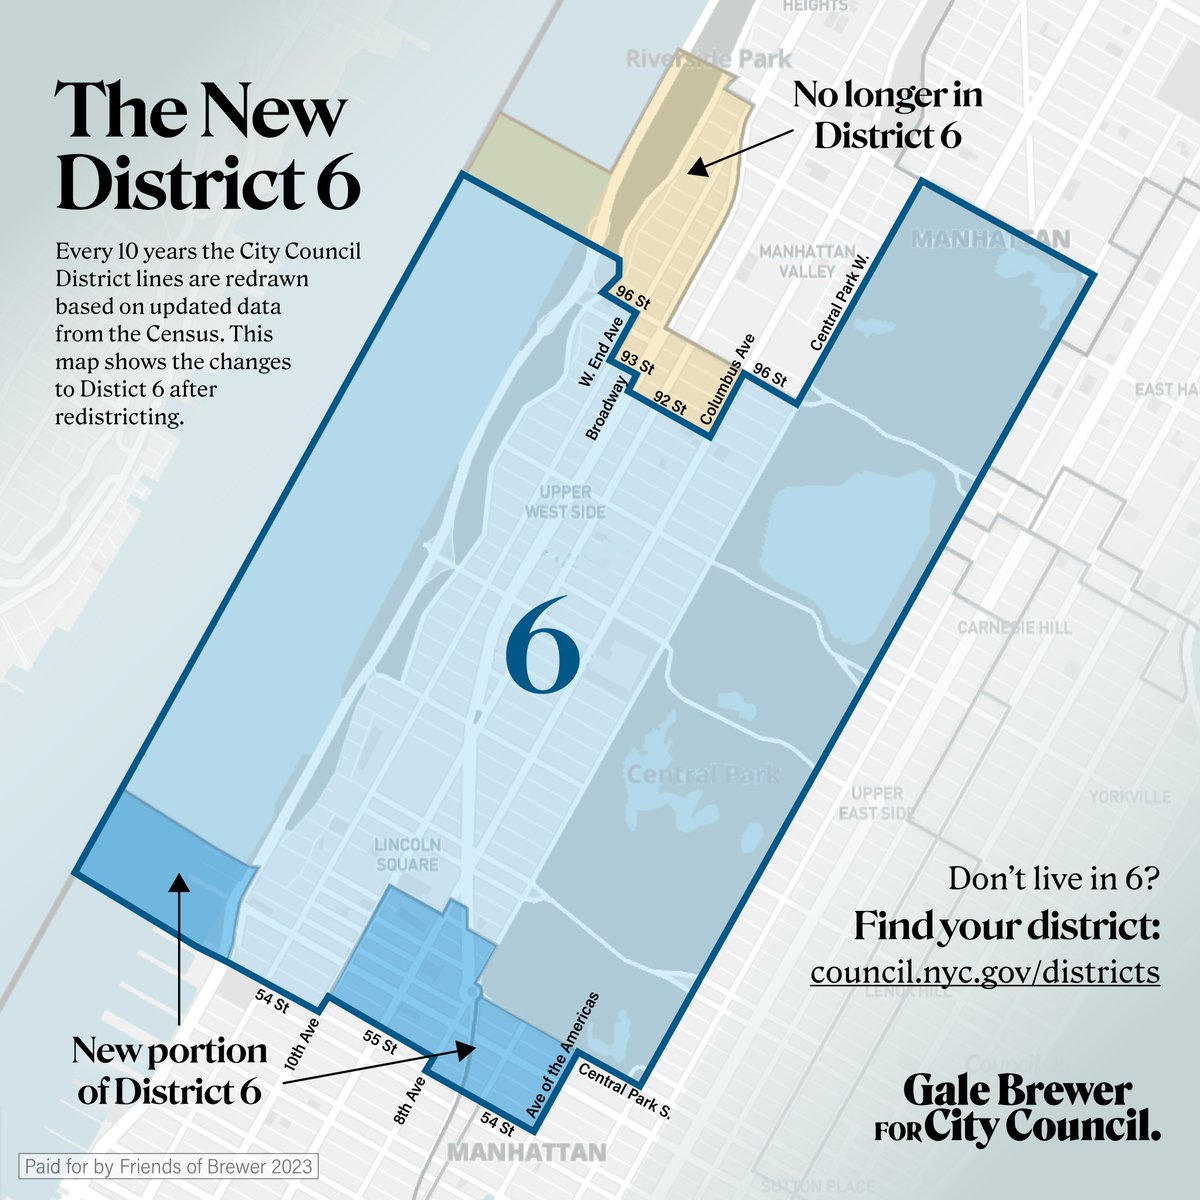 Every 10 years the City Council District lines are redrawn based on updated data from the Census. This map shows the changes to District 6 after redistricting. Not in Dist. 6? find your district: council.nyc.gov/districts